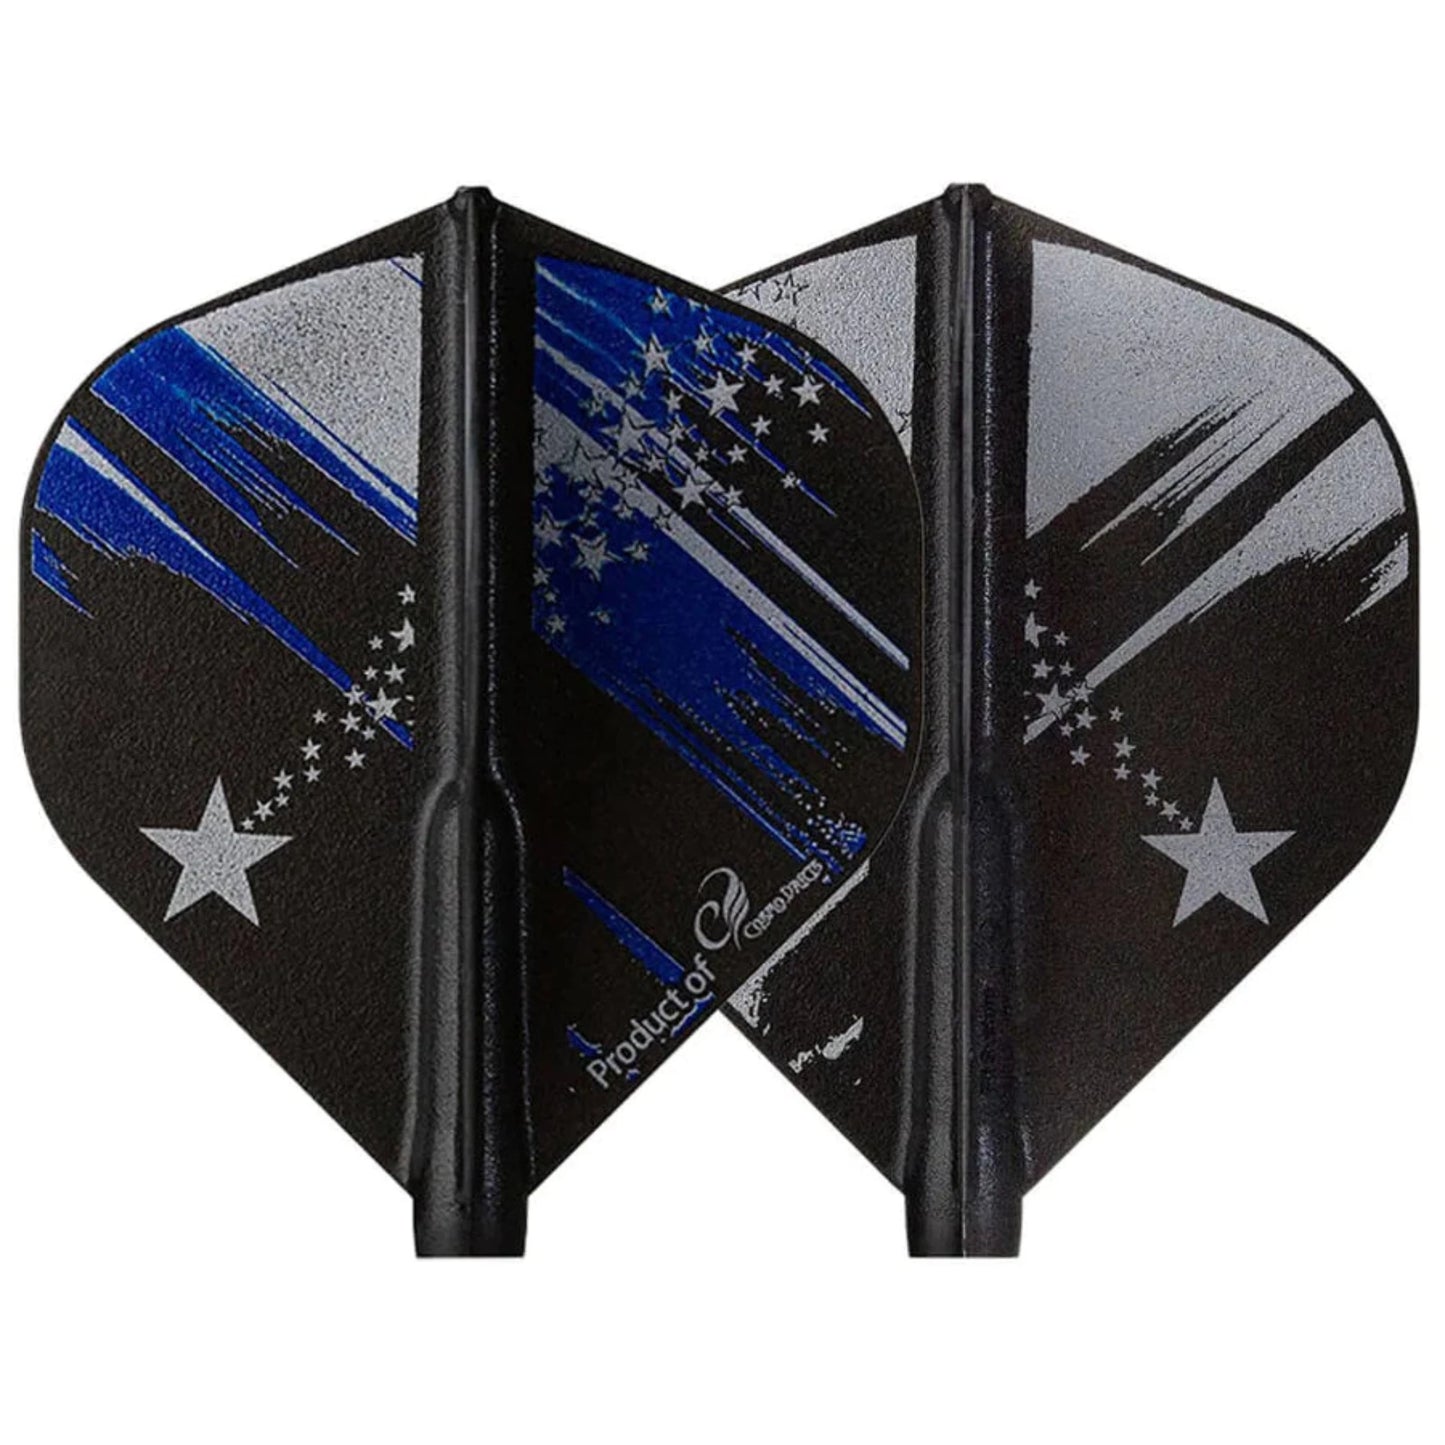 Cali West dart flights. The flights are black with blue and grey artwork featuring a brushstroke-like swipe and star shape details.